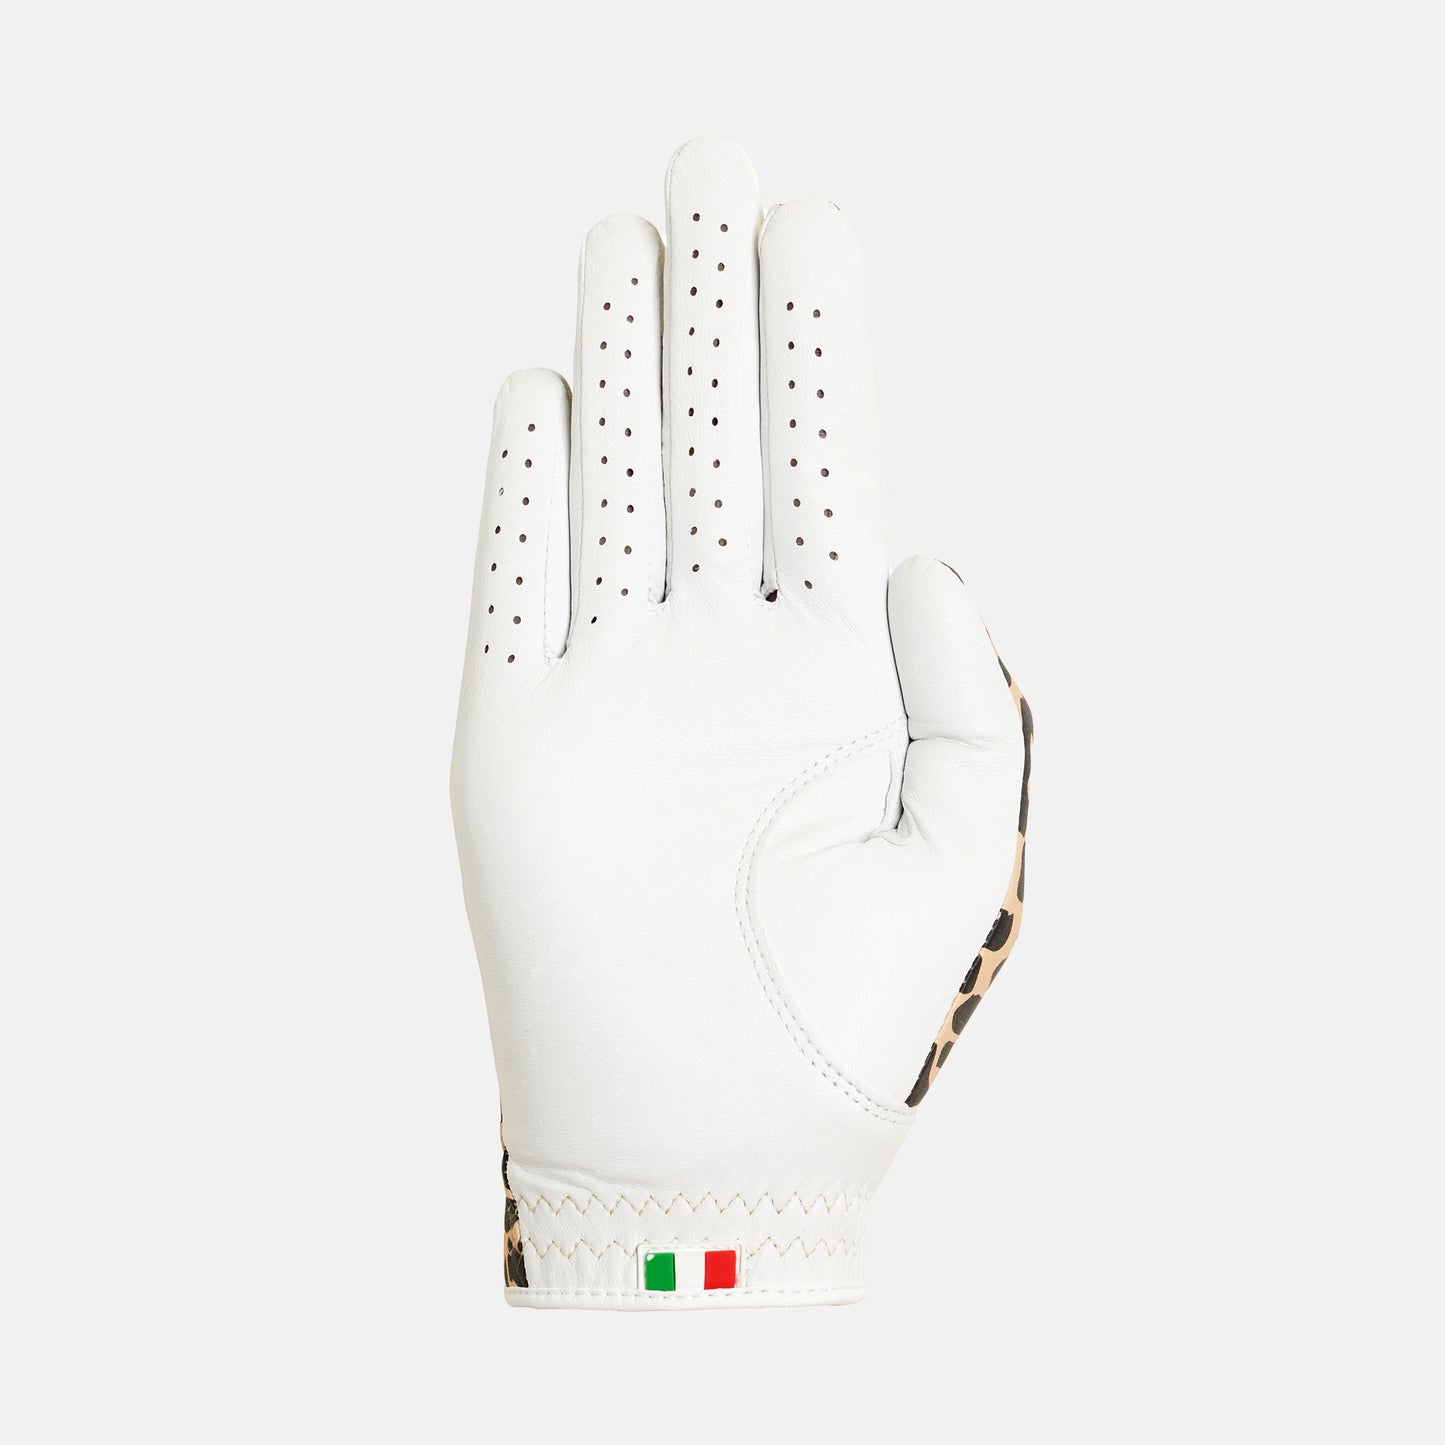 left-handed golf glove for women's designed for right-handed players, features a premium combination of Cabretta leather and microfibre leather.